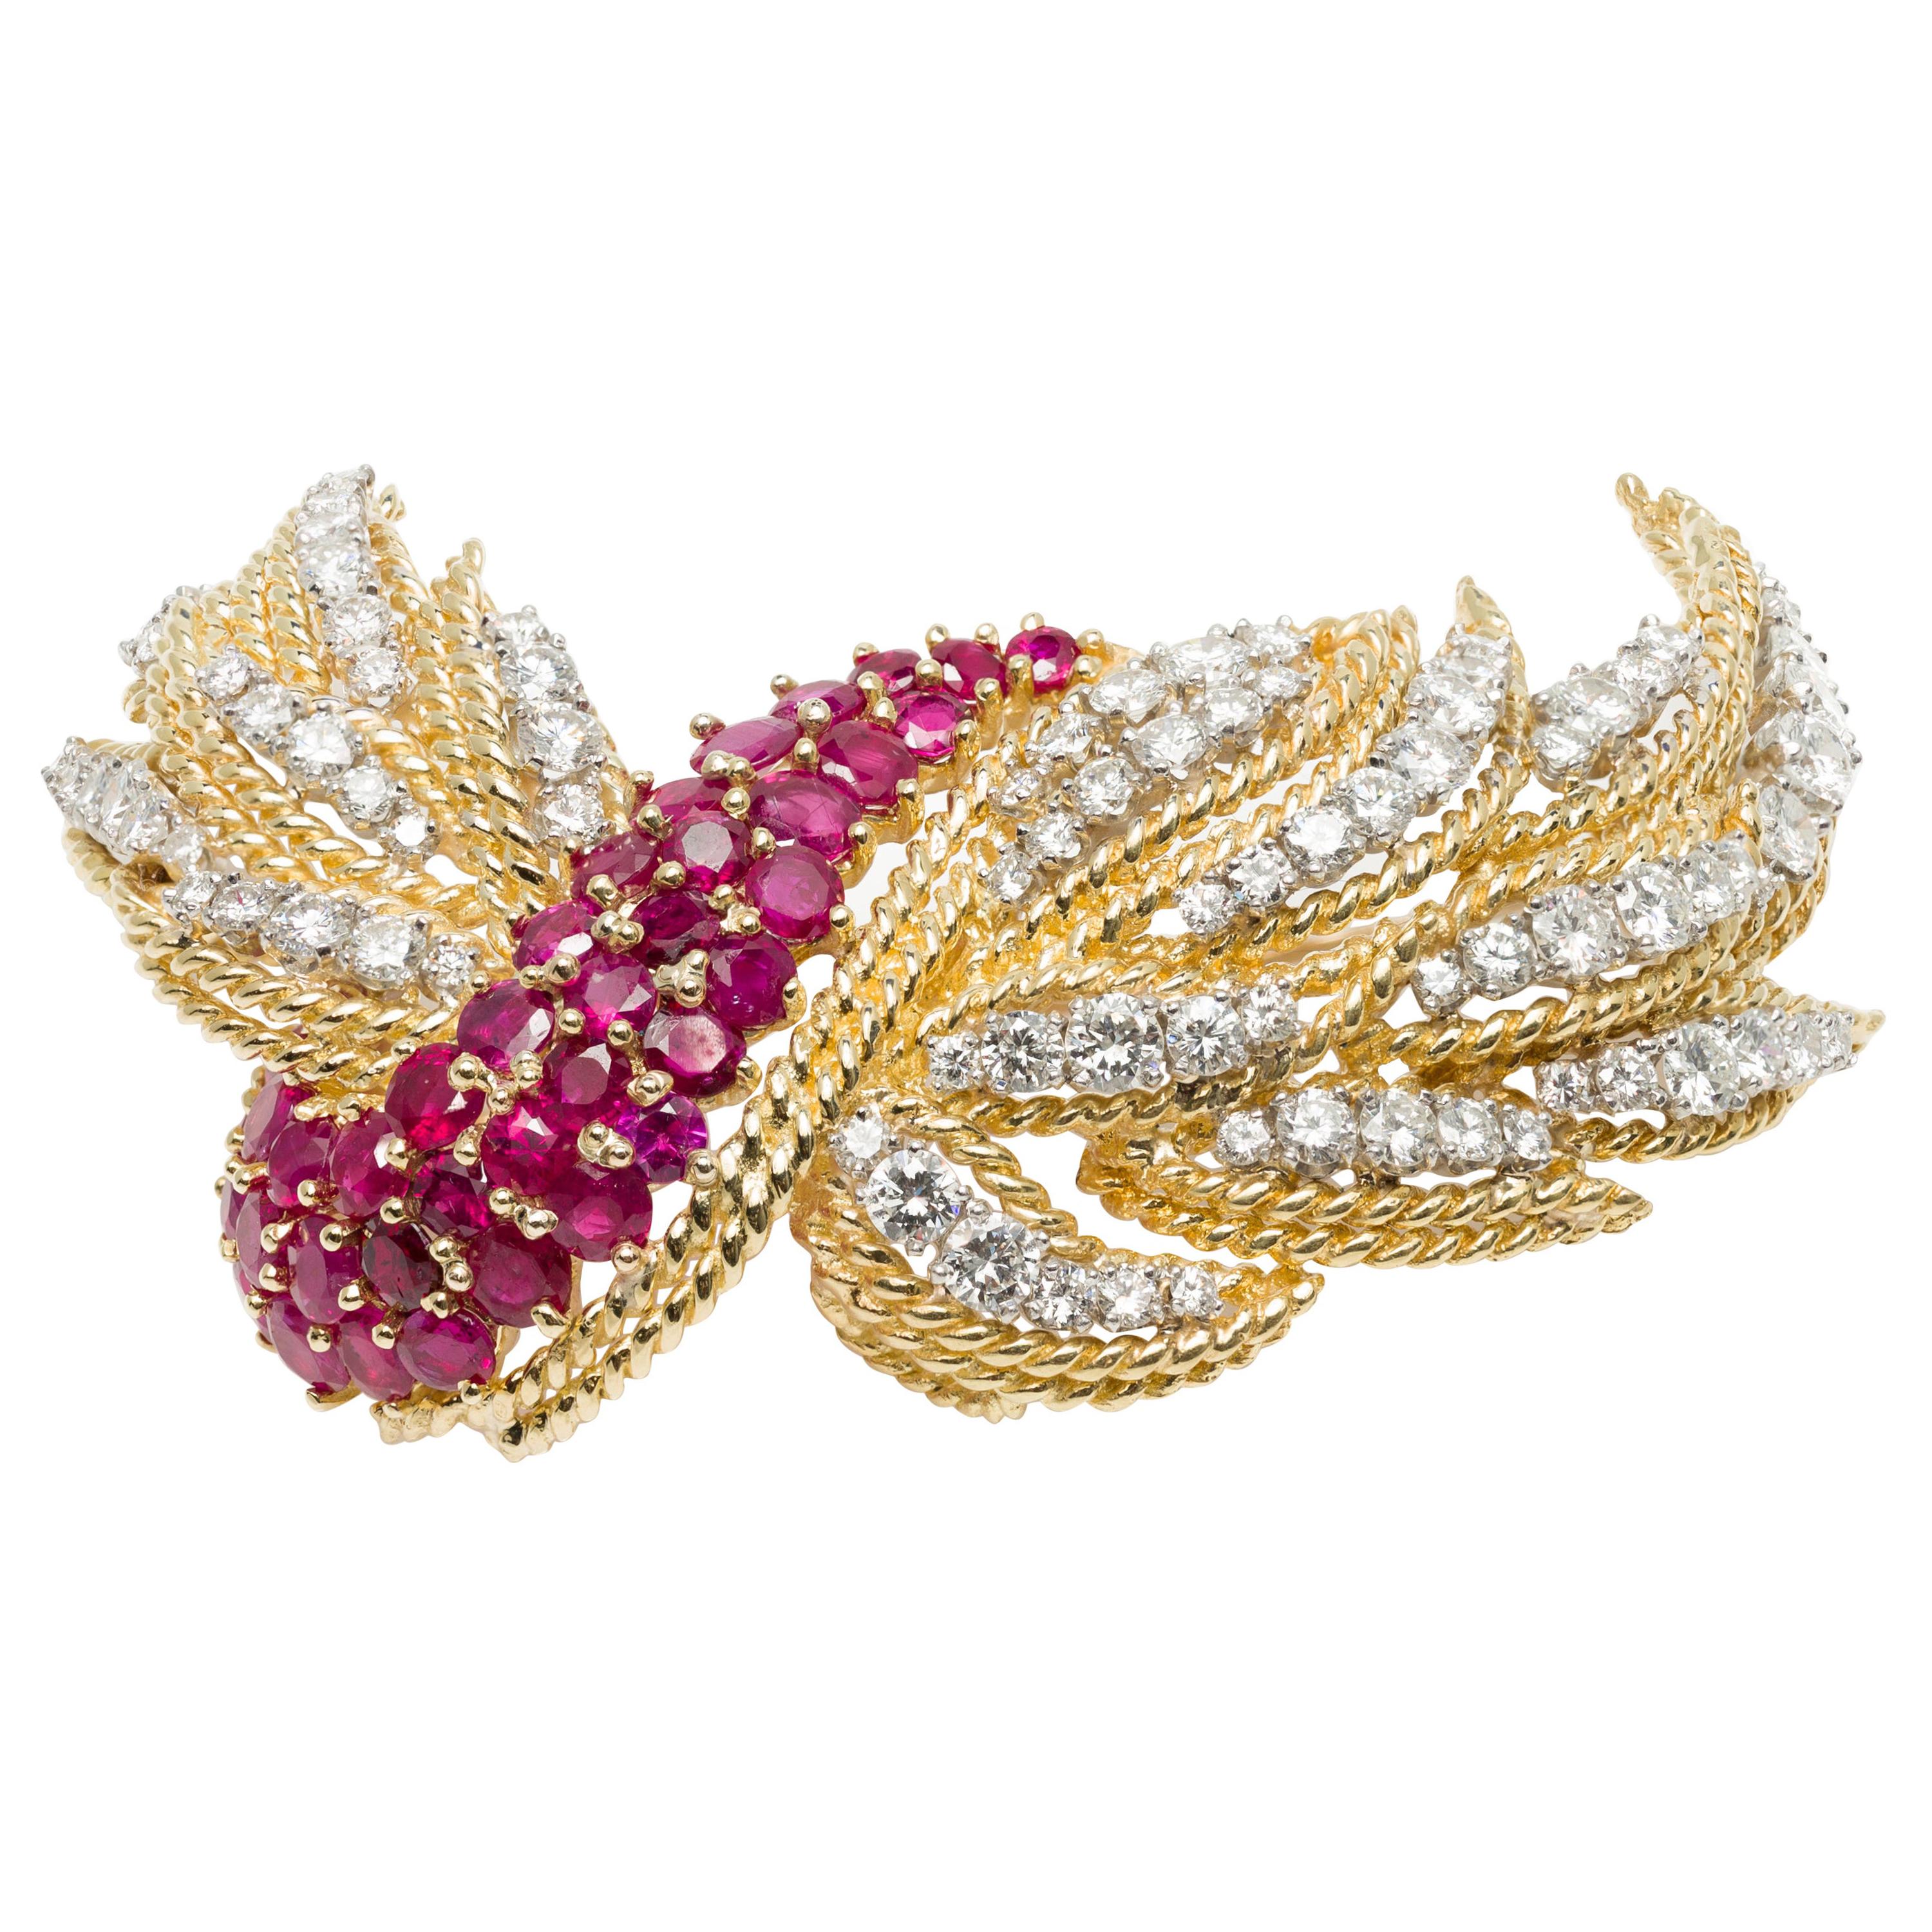 Italian Midcentury Burmese Ruby and Diamond Brooch in 18k Yellow and White Gold